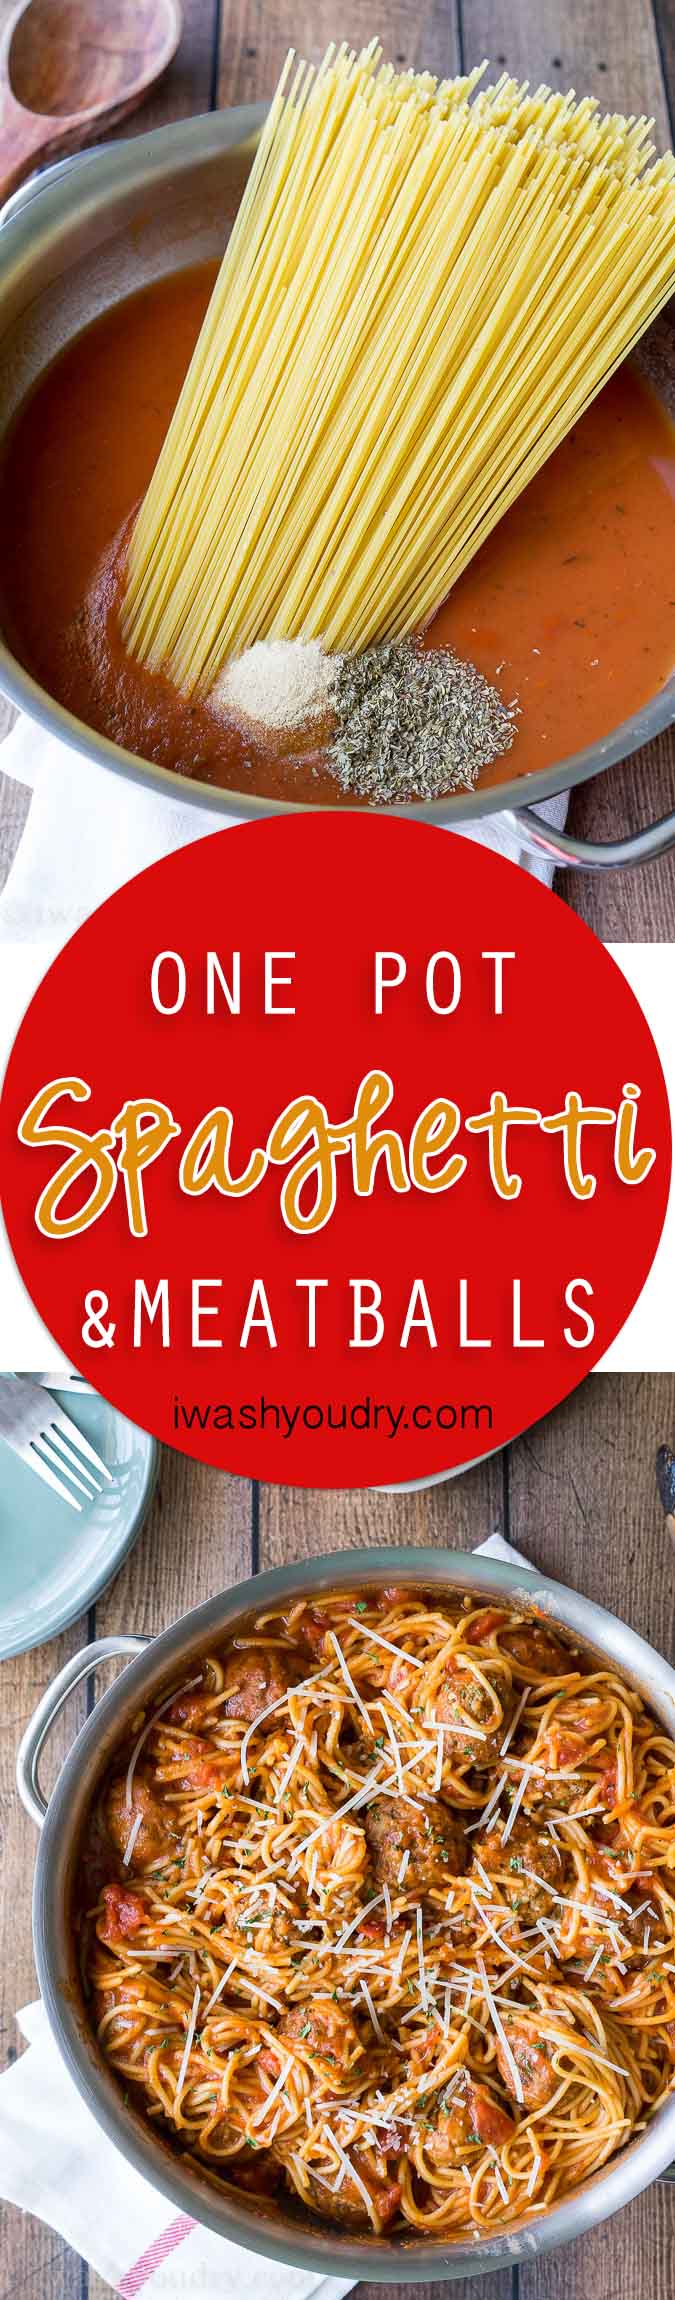 Everything gets cooked in one pan! My family loves this One Pot Spaghetti and Meatballs, I love how it's a super easy clean up!